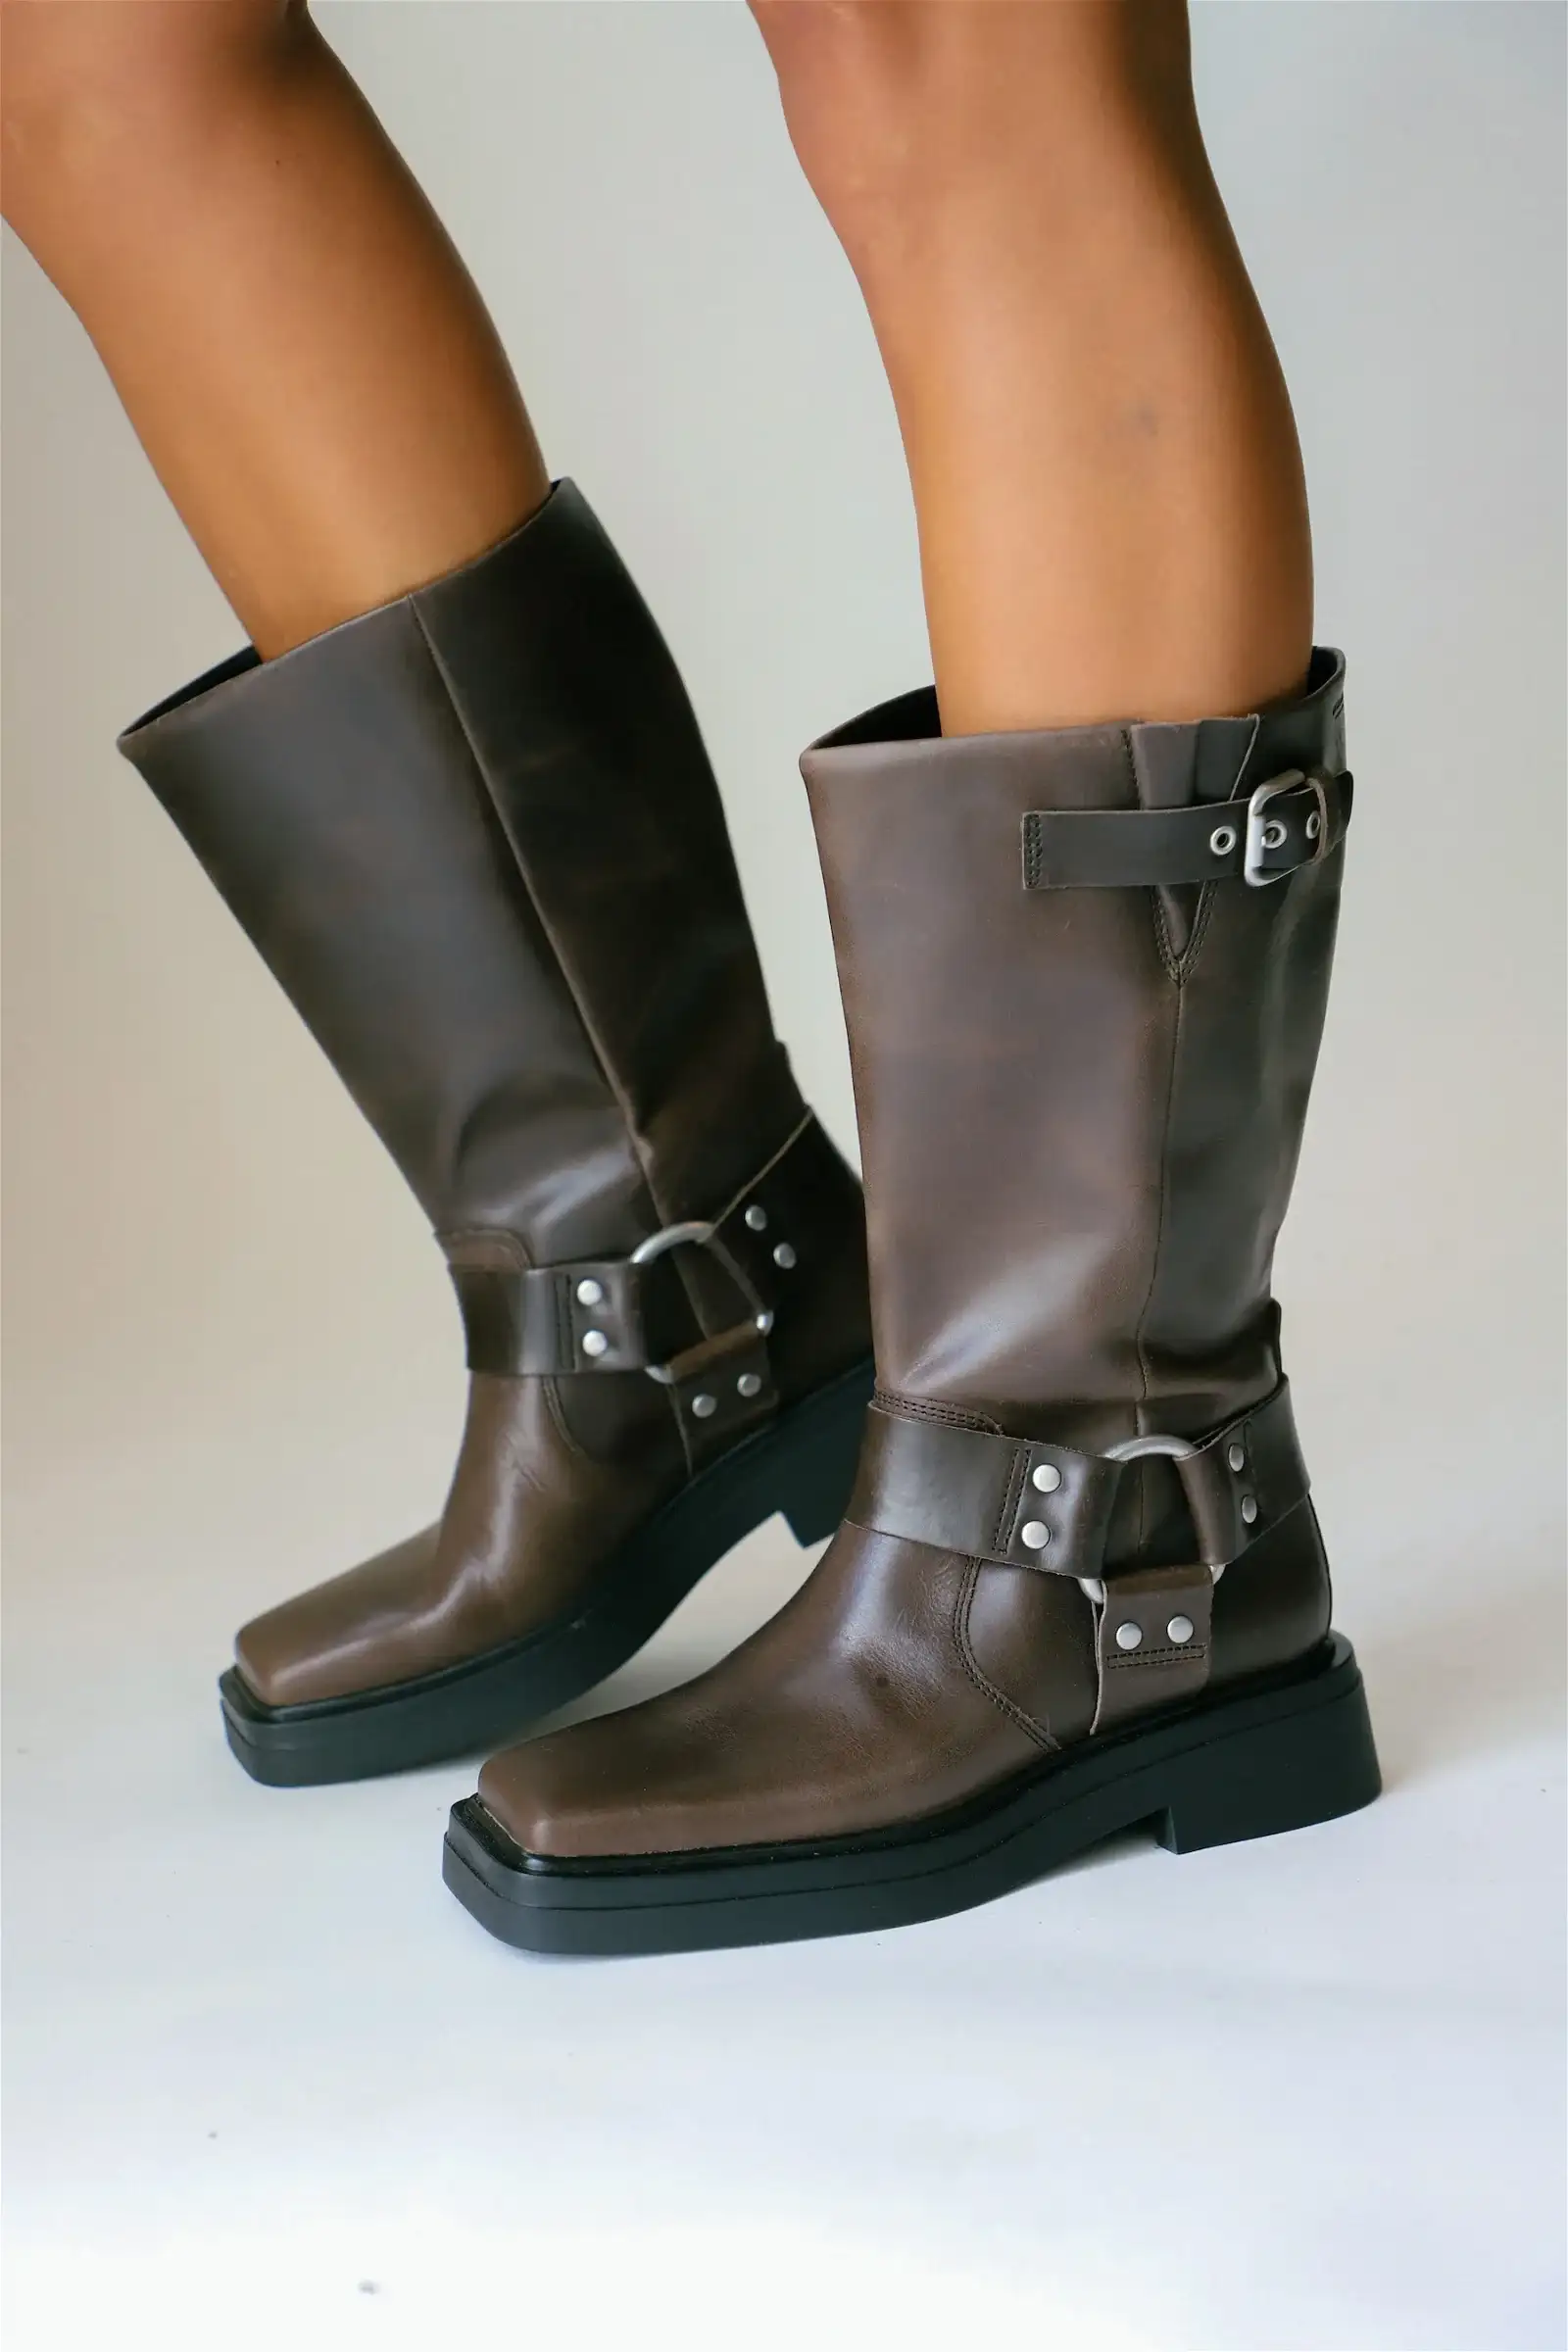 Image of Mud Eyra Boot<br>Now \\$221.25